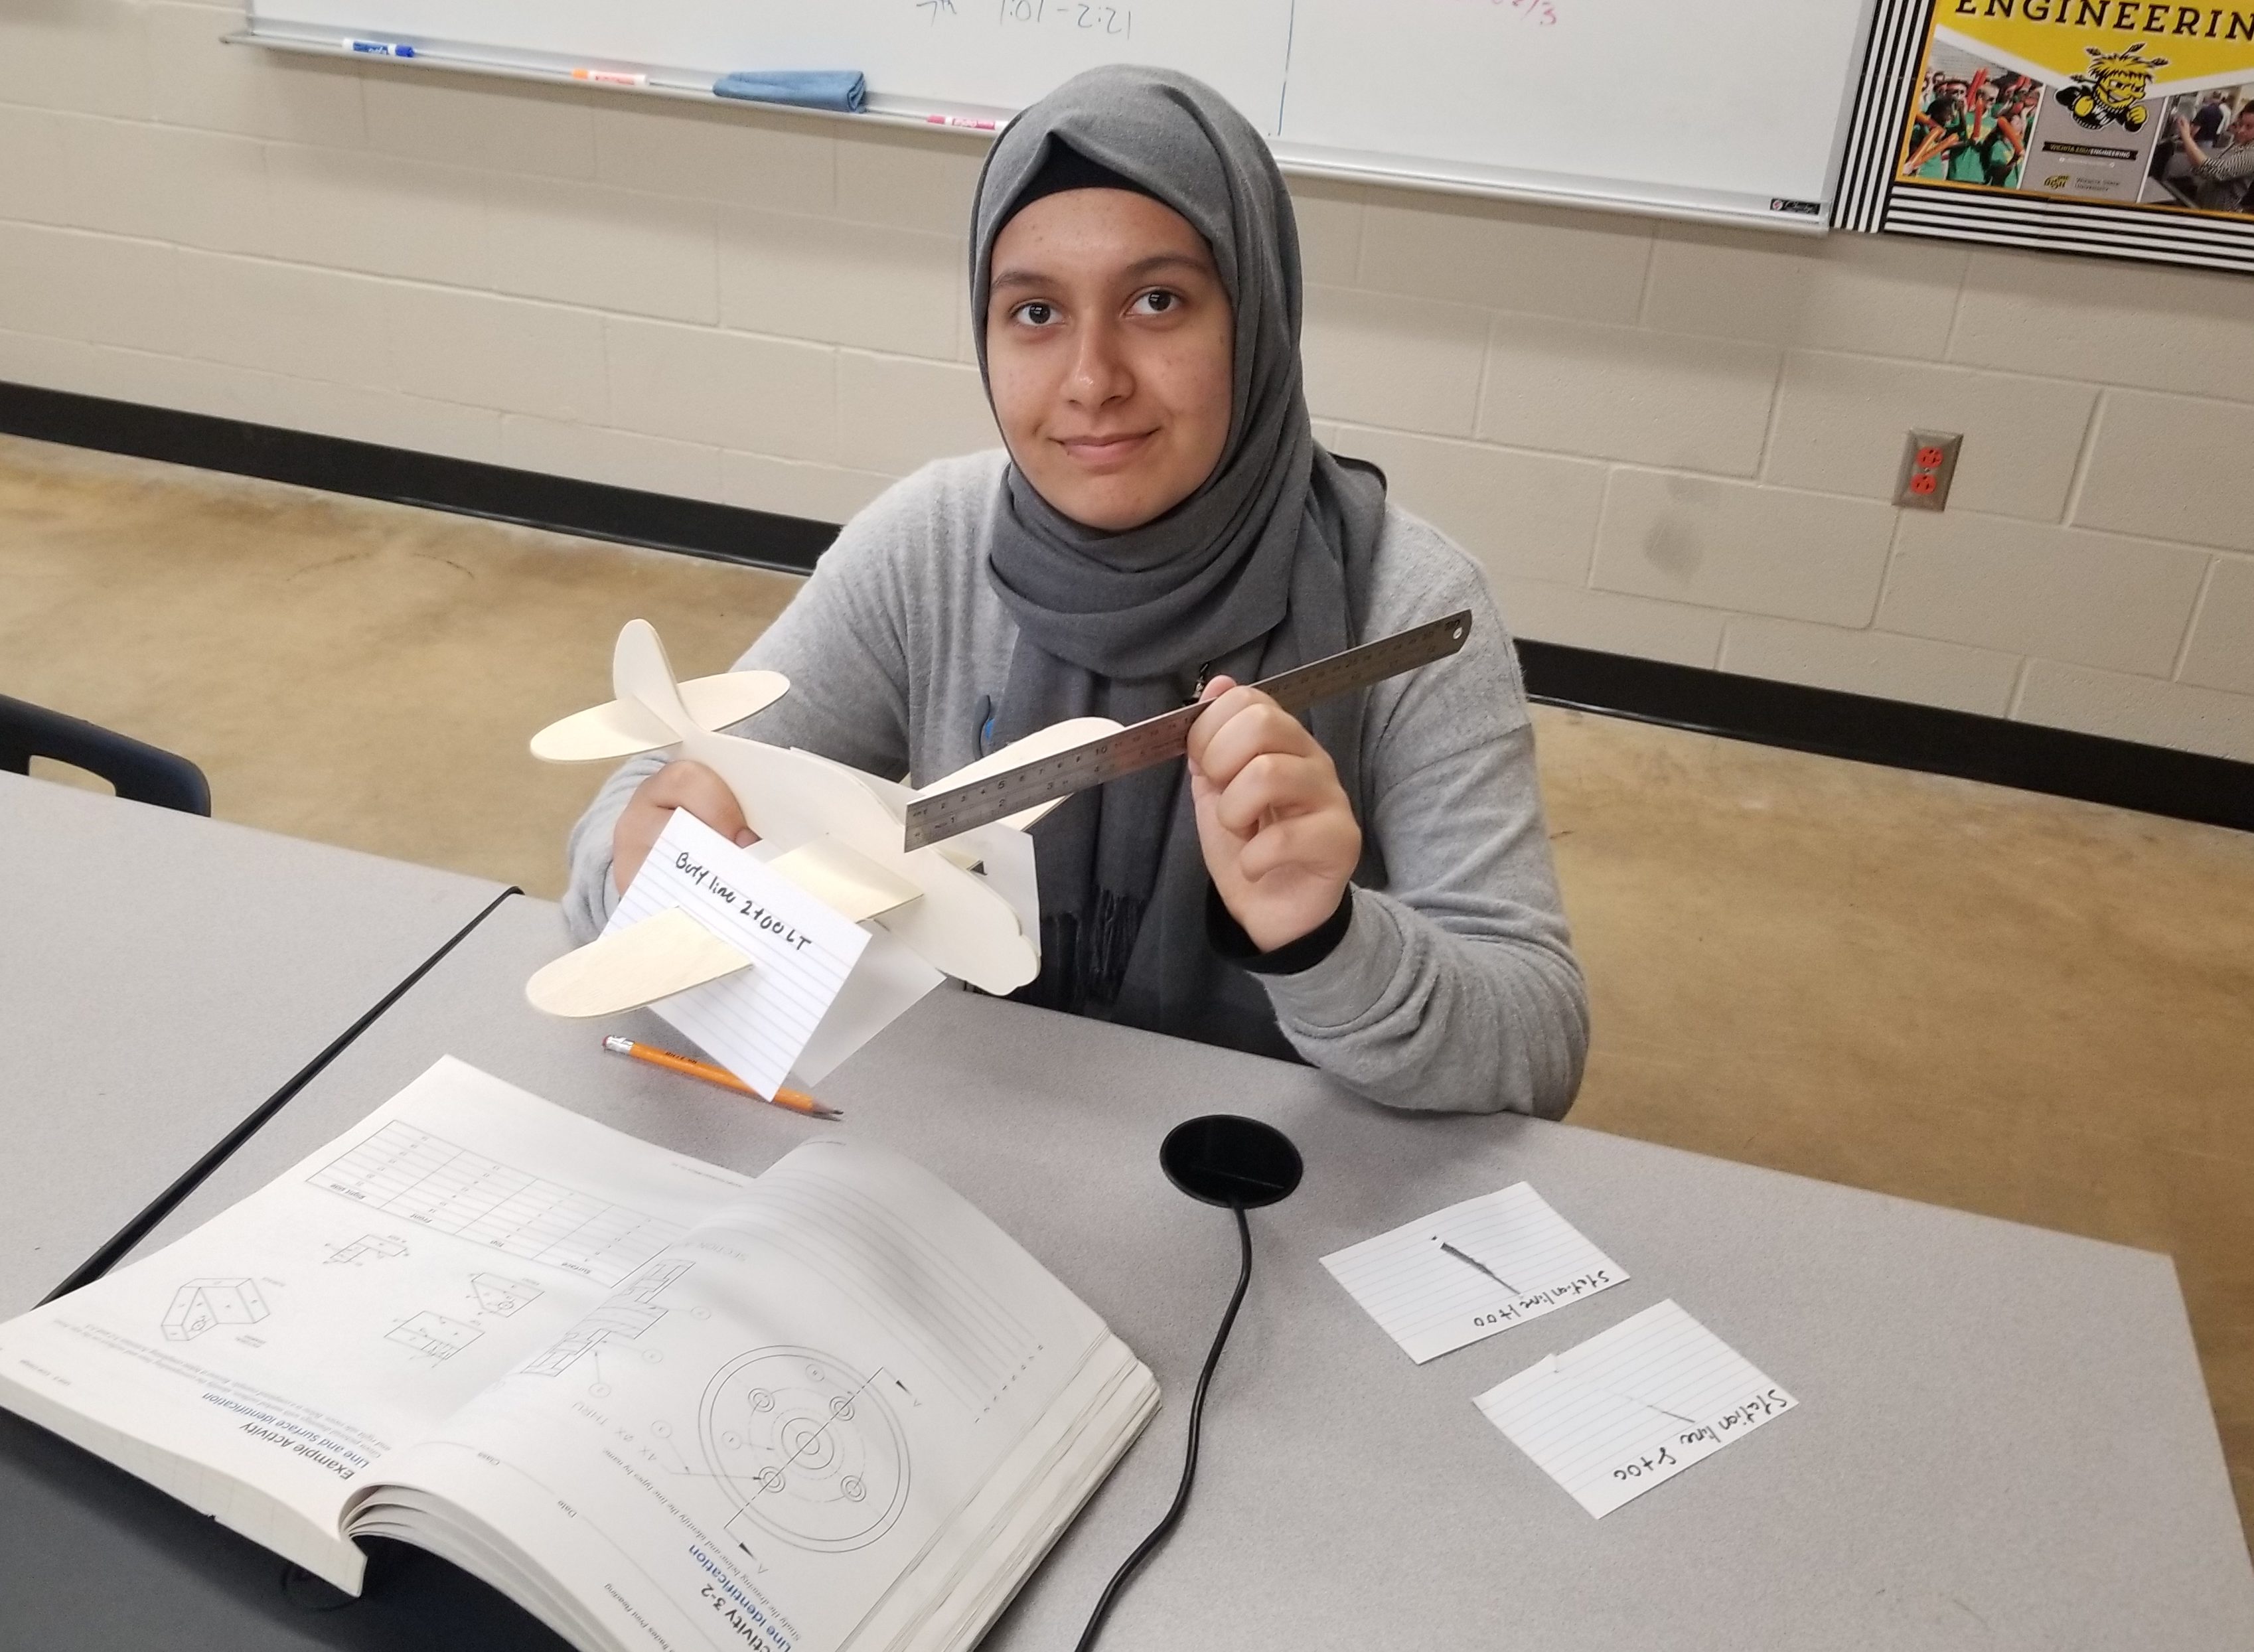 The aviation pathway allows Wichita’s ninth-graders and 10th-graders to take foundational courses in airplane manufacturing to prepare them for advanced college-level training during their junior and senior years